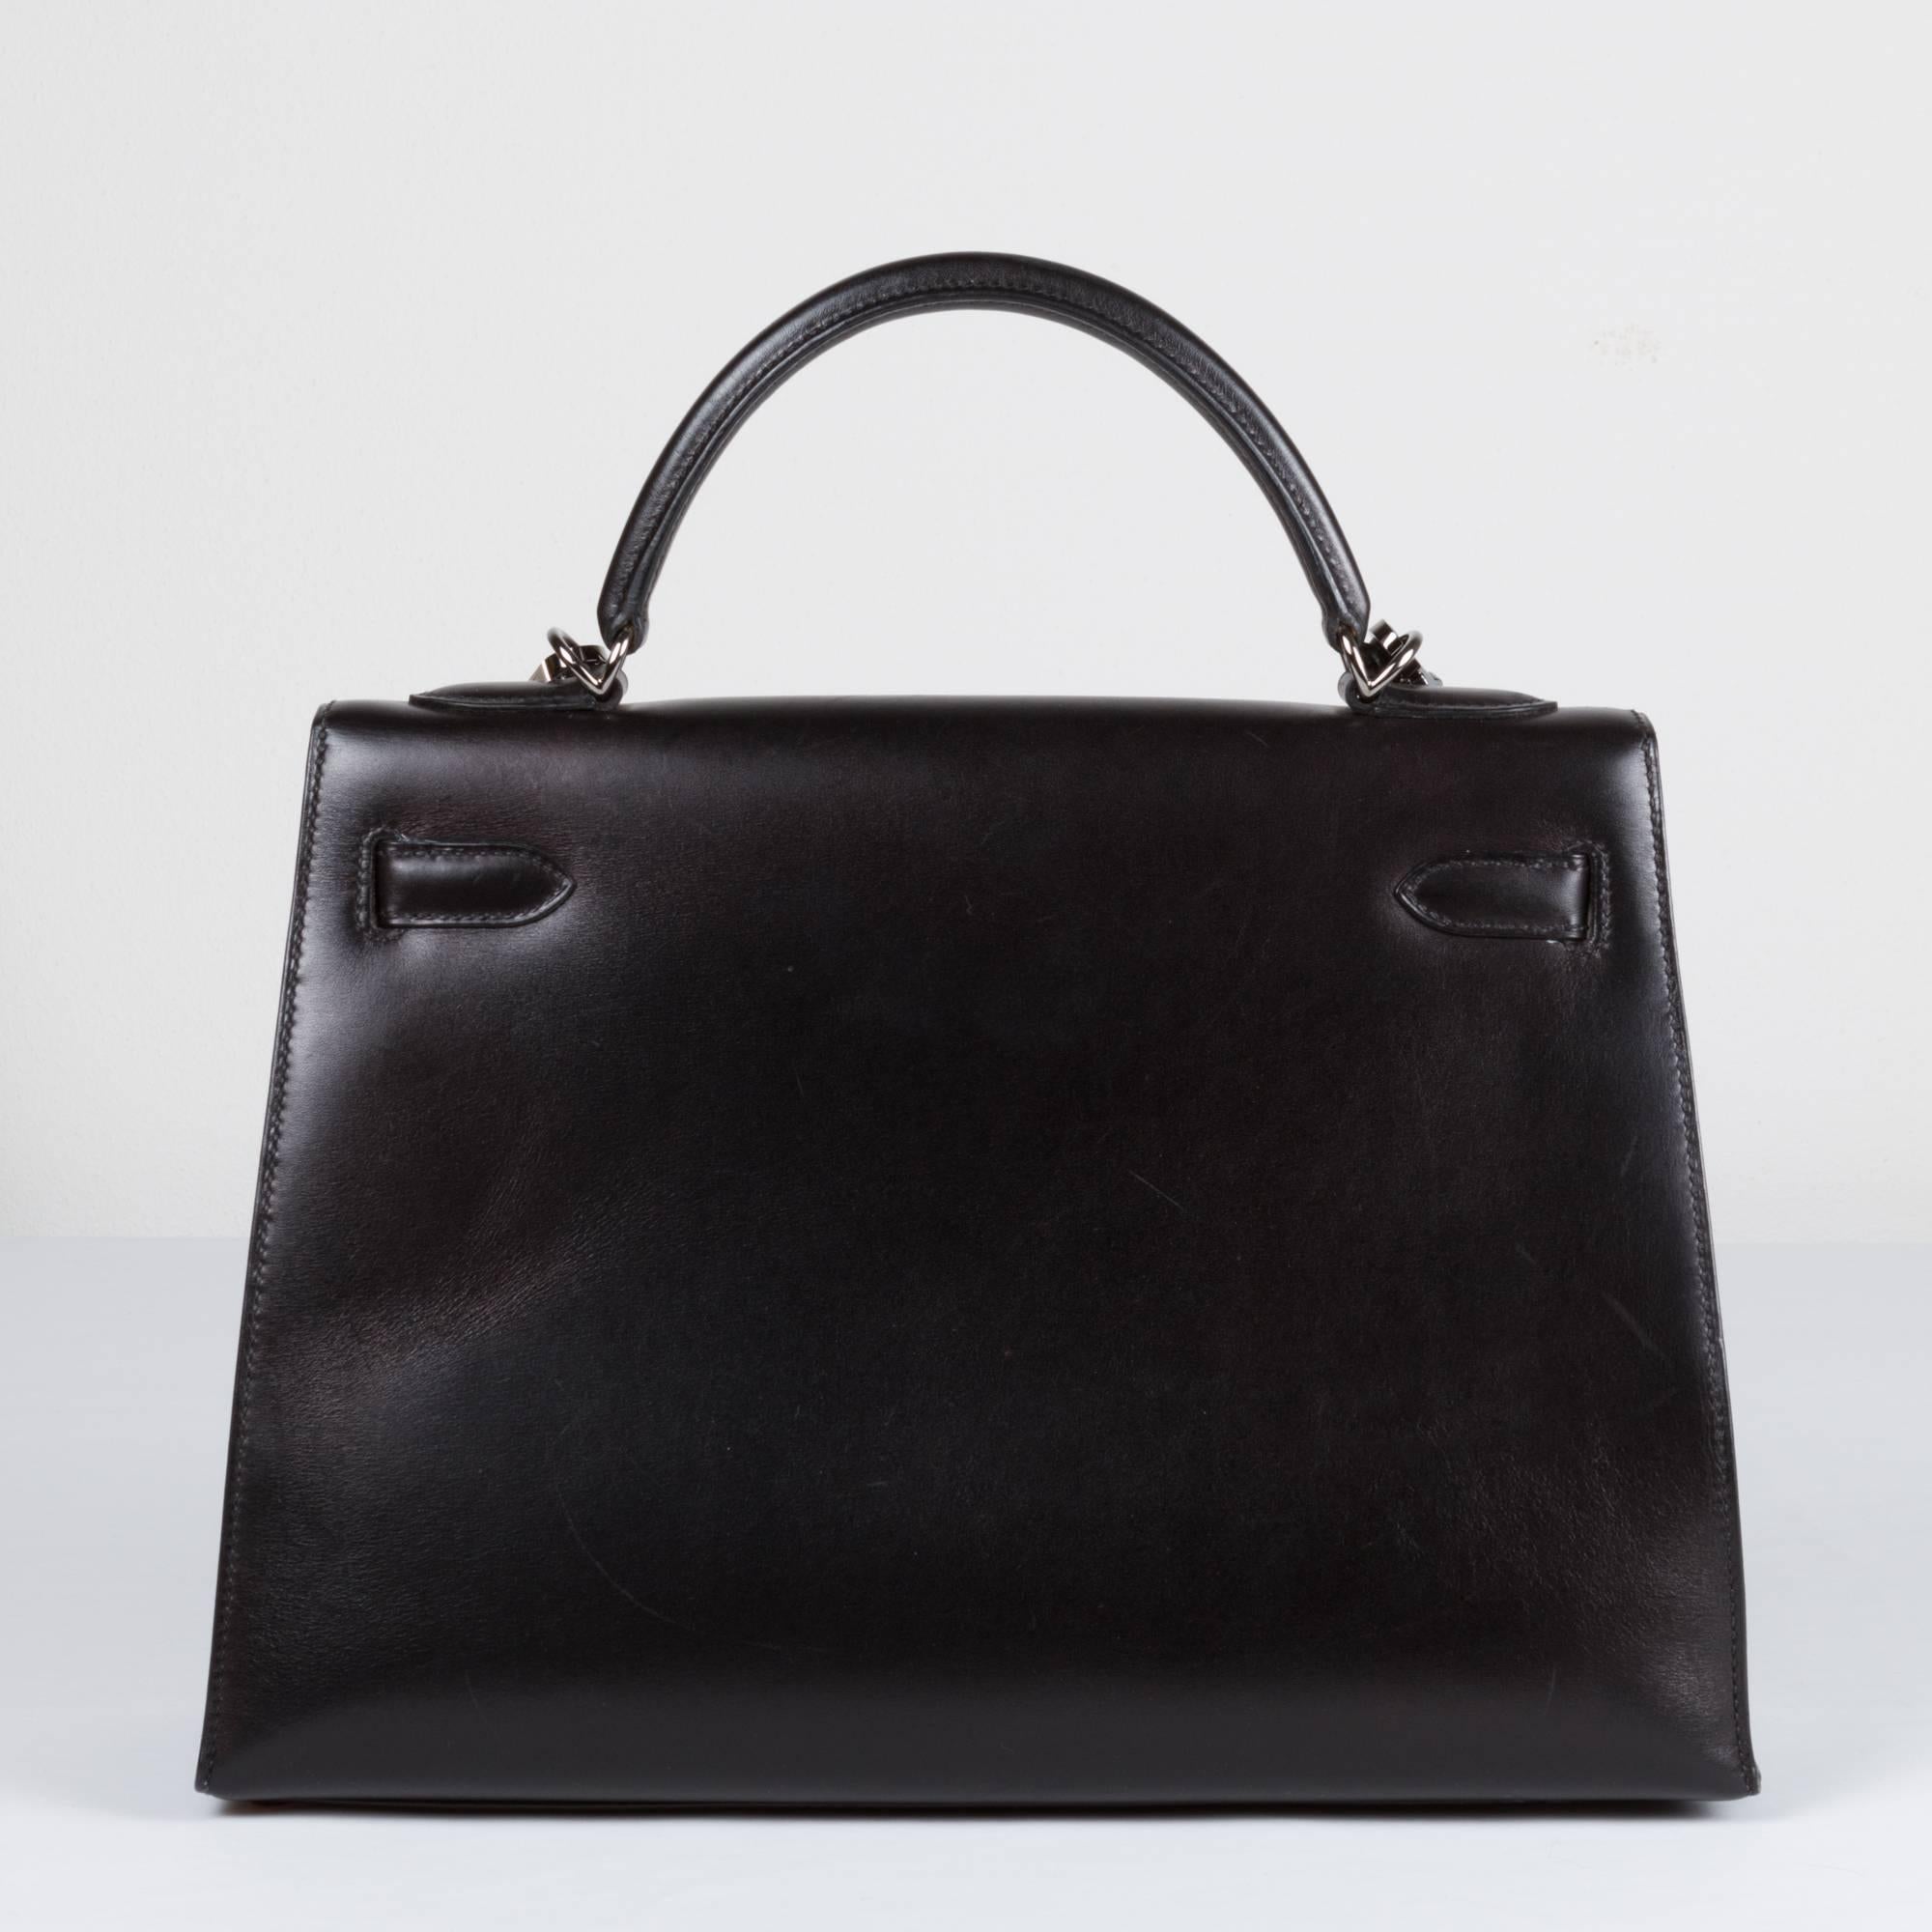 Kelly Hermés in black box.
Hardware in burnished silver.
The bag comes withoud padlock, but with dustbag, clochette and keys, and shoulderbelt.
